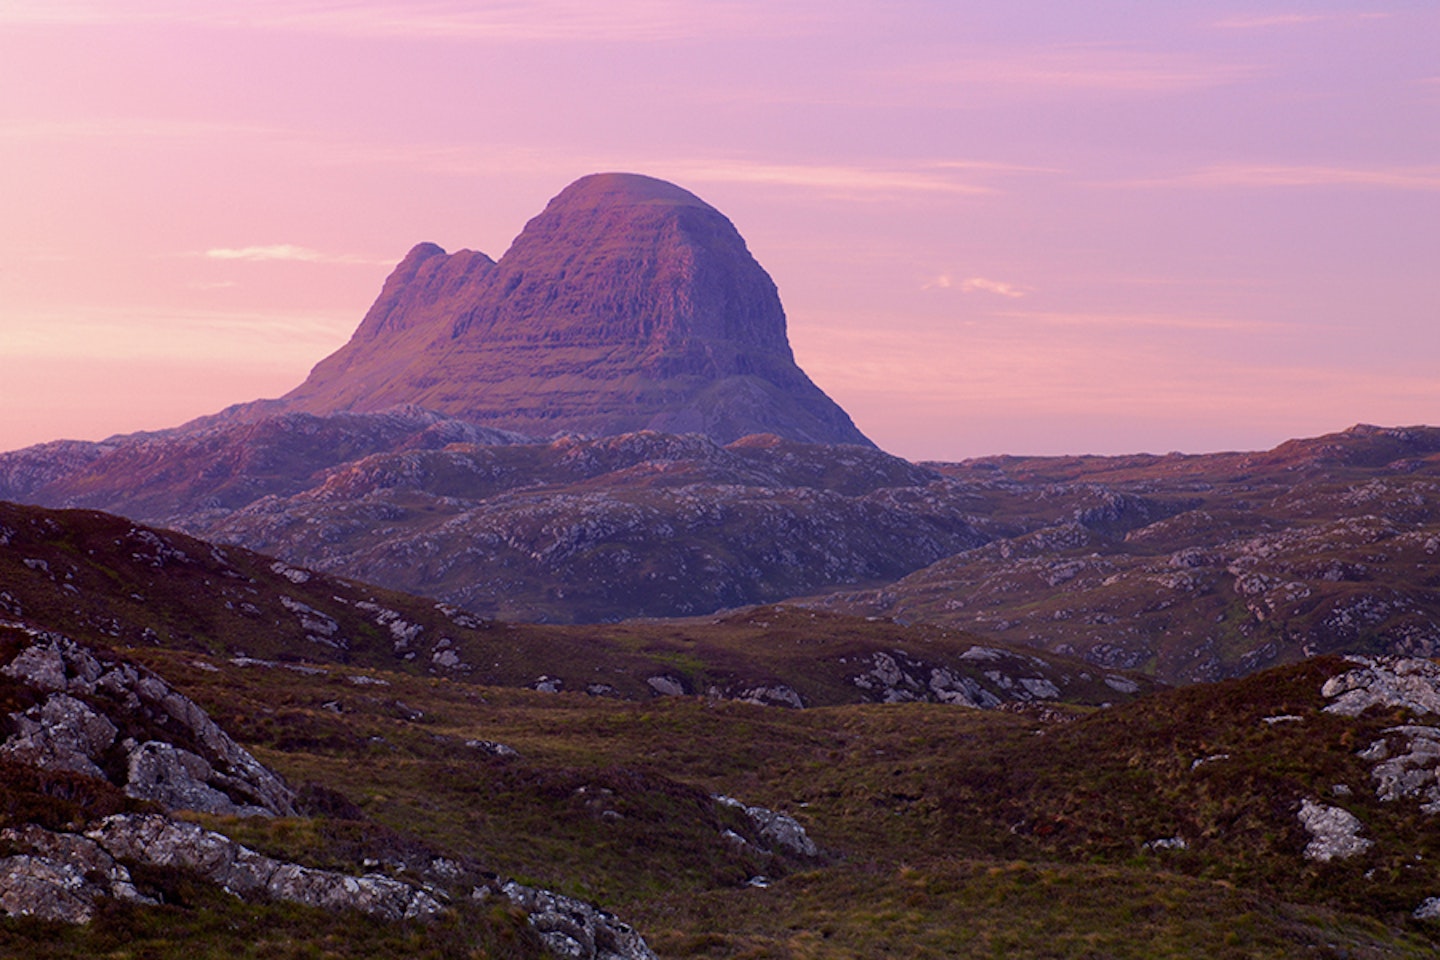 The awesome profile  of Suilven at sunrise, viewed from near the village of Lochinver.